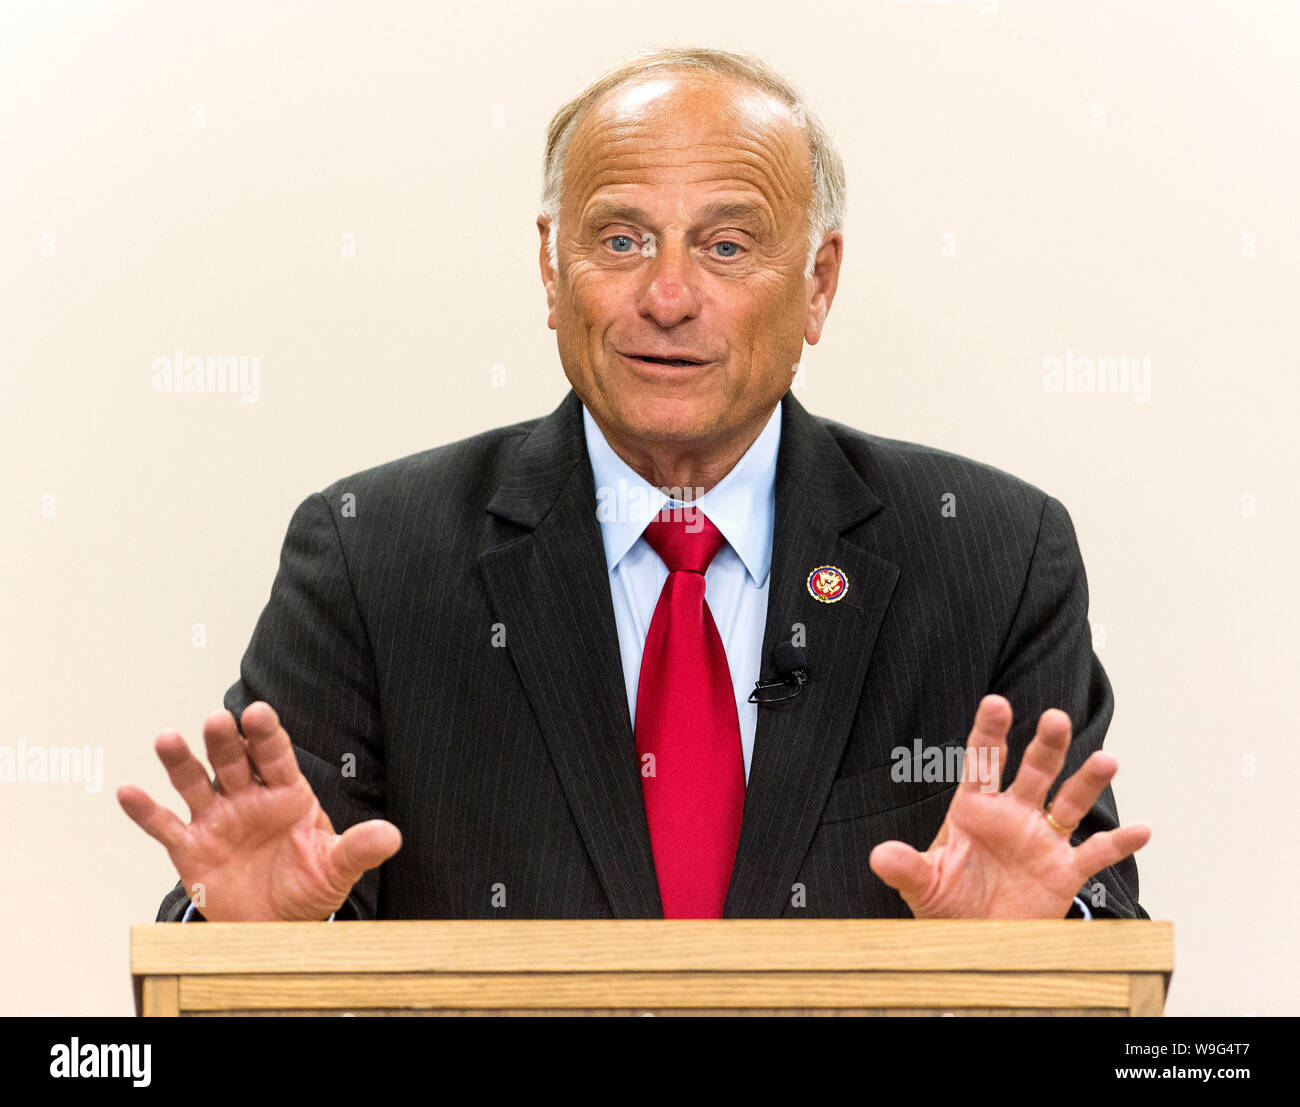 Boone, Iowa, USA. 13th Aug, 2019. Congressman STEVE KING (R-IA), who was stripped of his Republican Party committee assignments earlier this year for his racist comments, holds a town hall at the Boone Public Library. Credit: Brian Cahn/ZUMA Wire/Alamy Live News Stock Photo